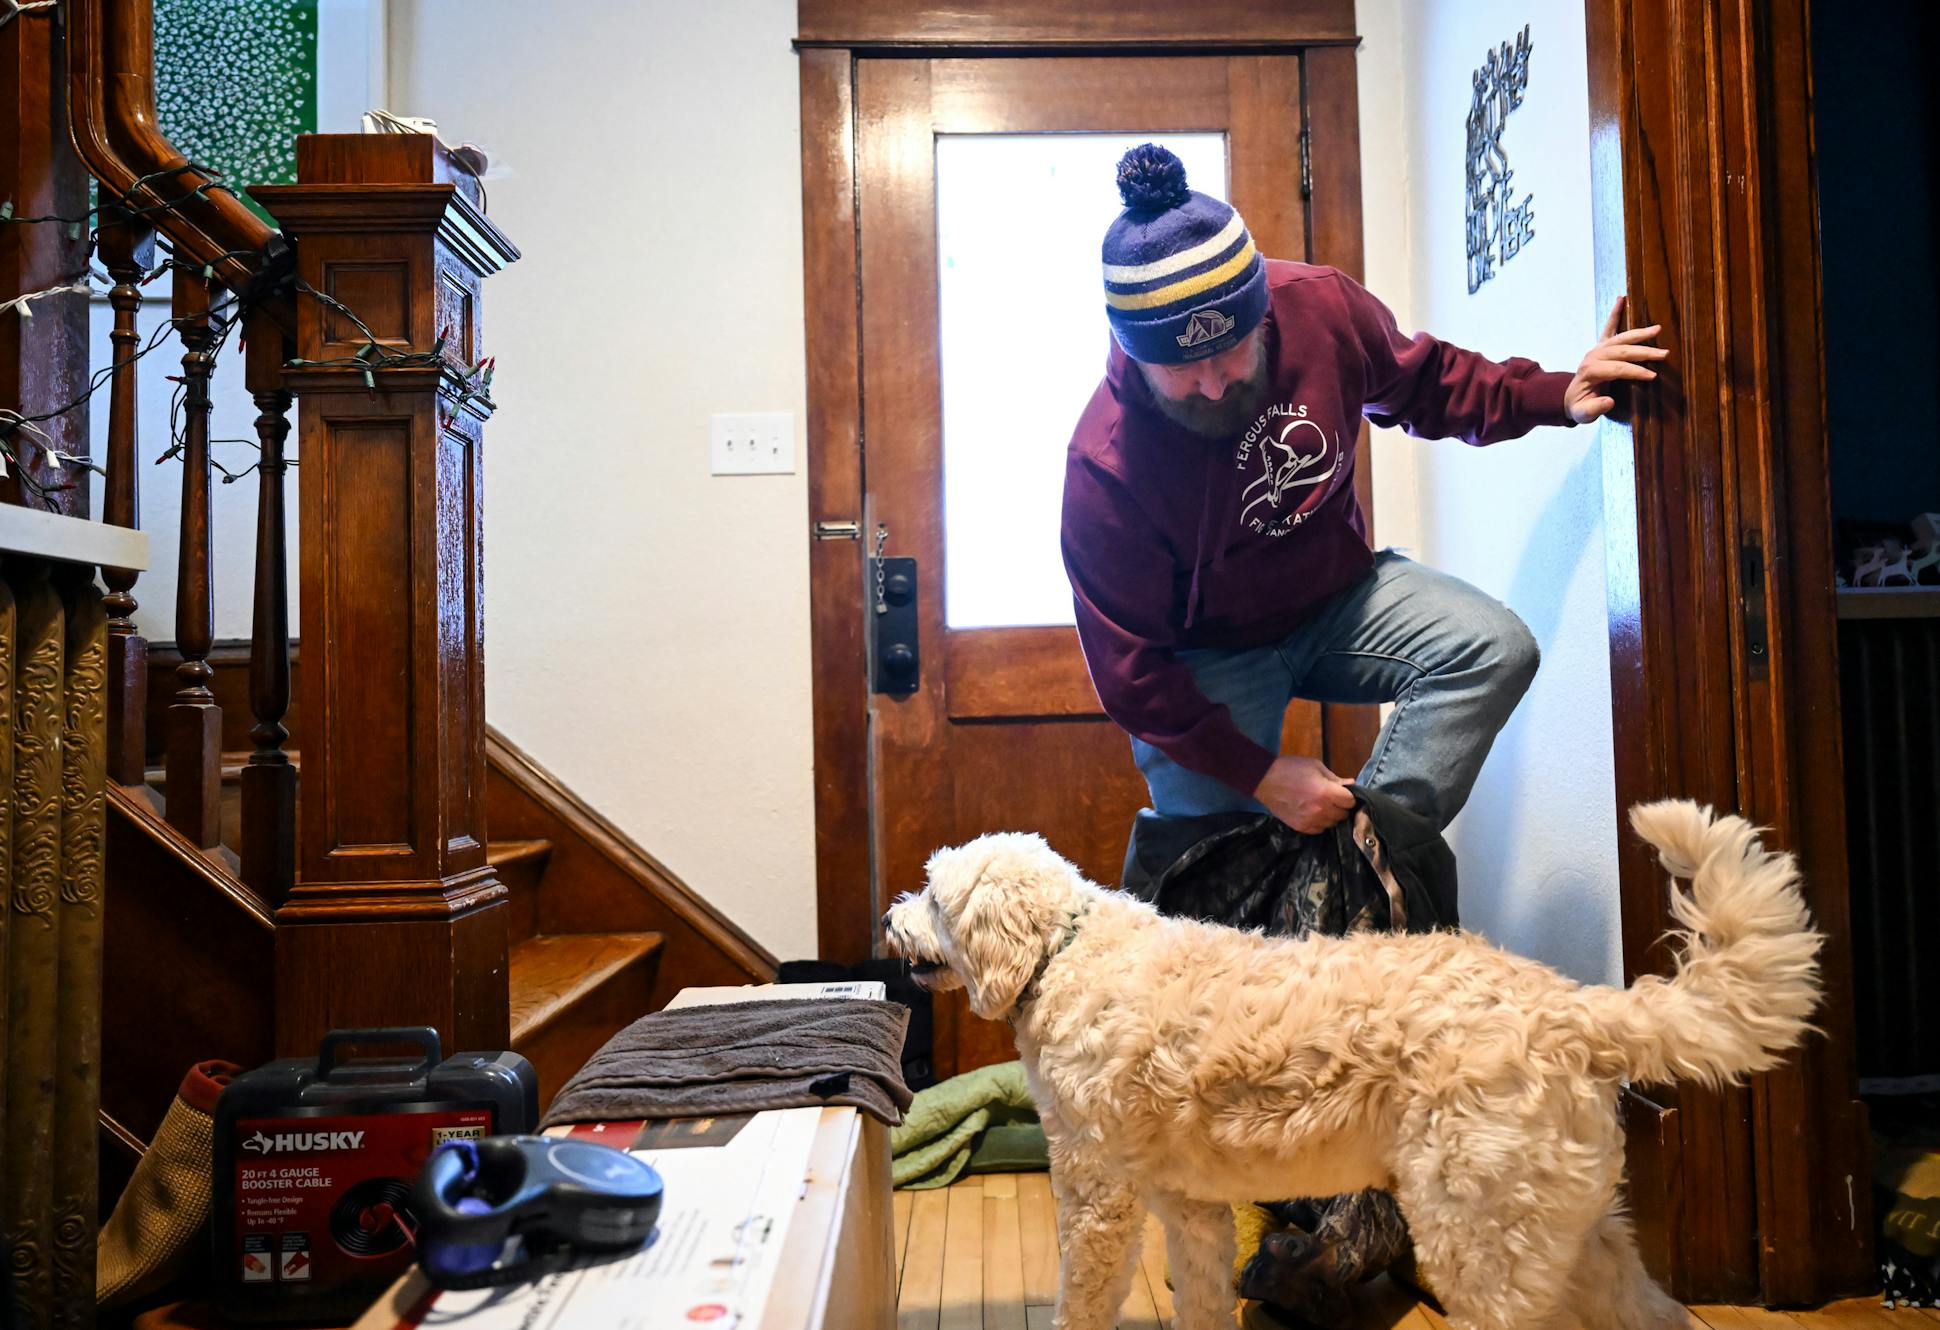 Chad Daniels put on his snow bib while preparing to take his three-year old goldendoodle, Po, to play at a nearby school.